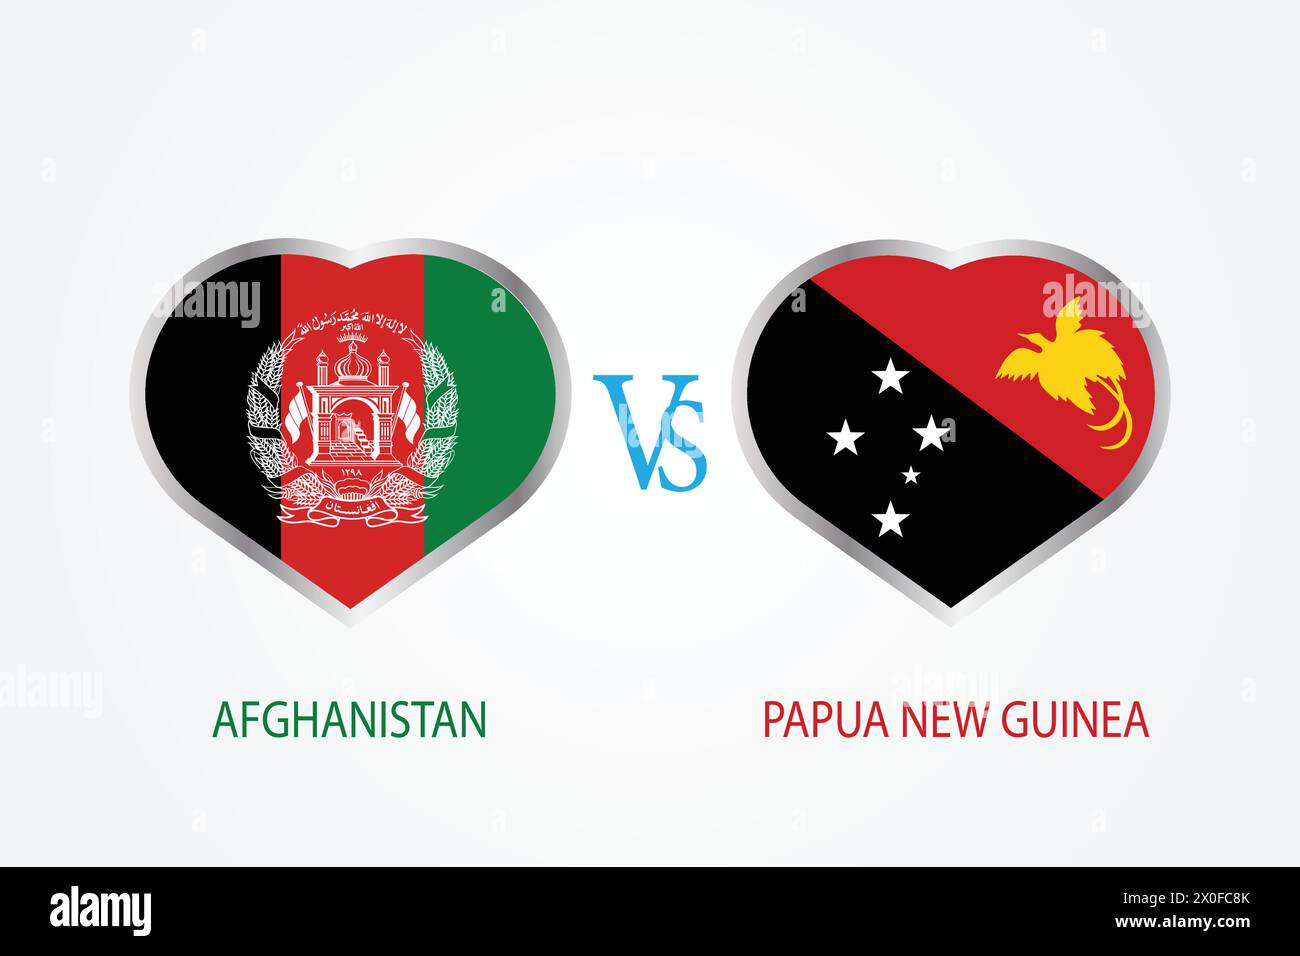 Afghanistan Vs Papua New Guinea, Cricket Match concept with creative illustration of participant countries flag Batsman and Hearts isolated on white Stock Vector